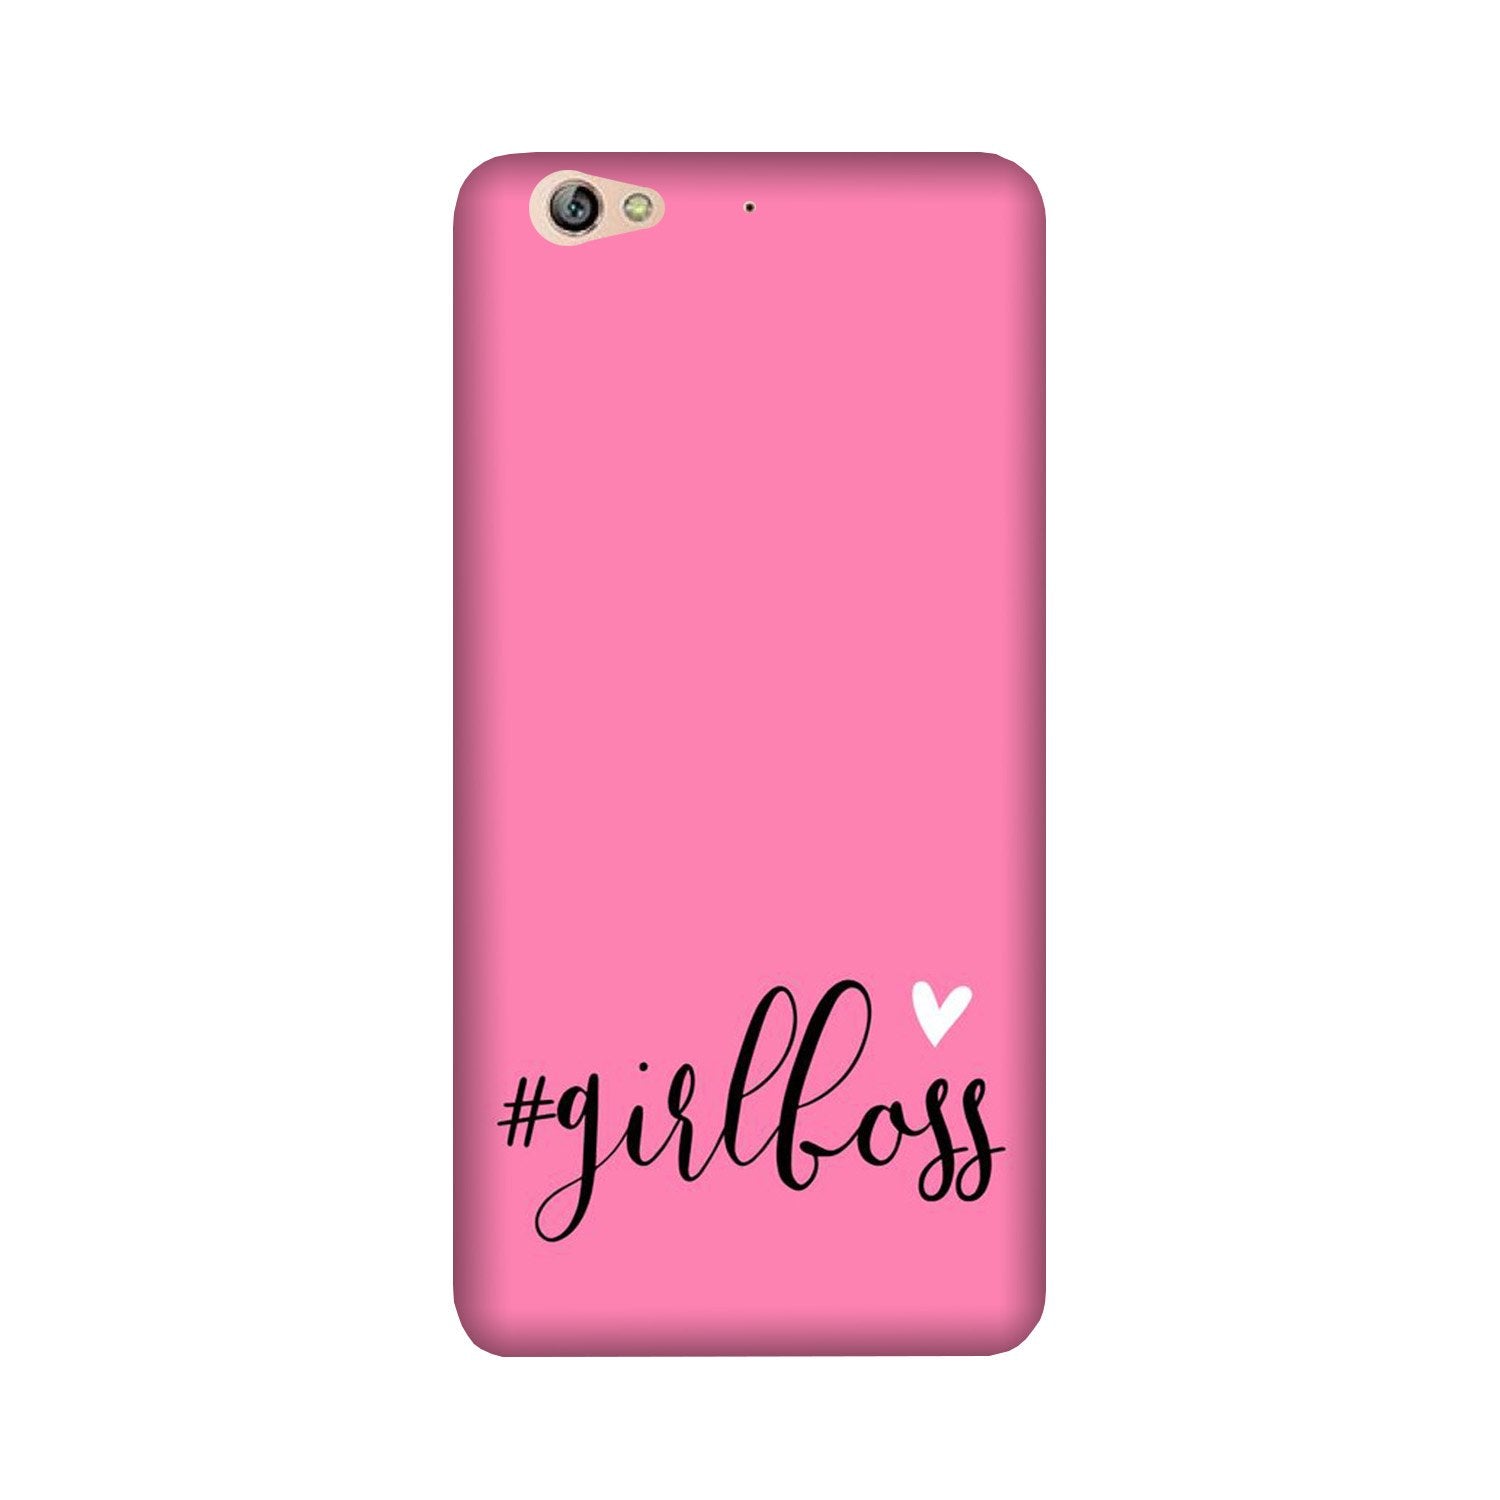 Girl Boss Pink Case for Gionee S6 (Design No. 269)